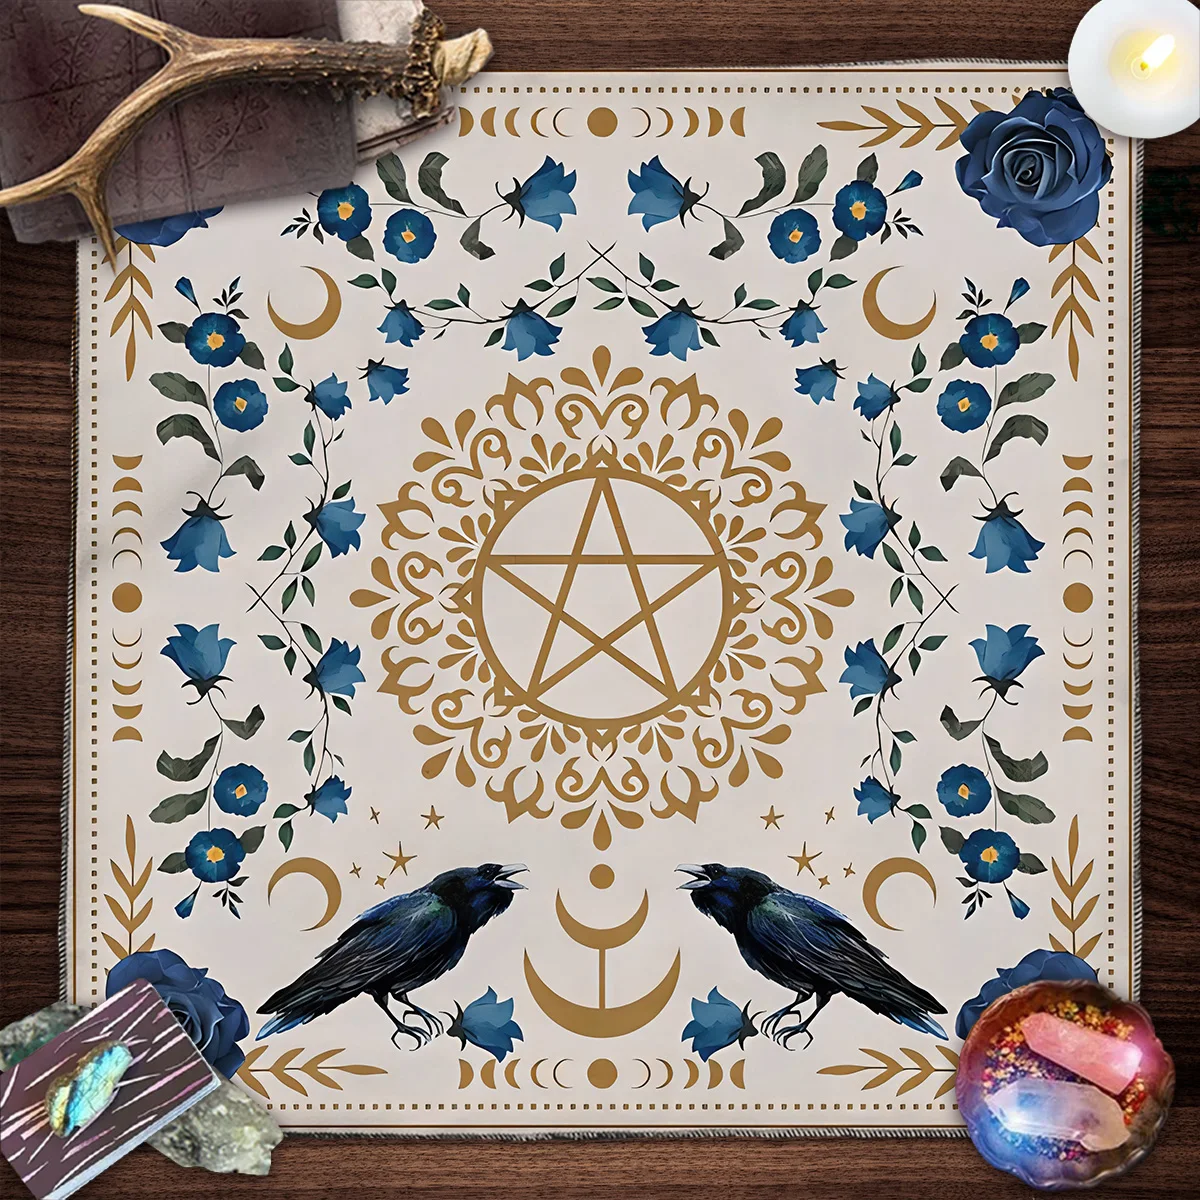 

Altar Cloth Sun Moon Flower Tarot Spread Cloth Tarot Reading Tarot Mat Witchy Cottagecore Decor Witchy Gifts Board Game Card